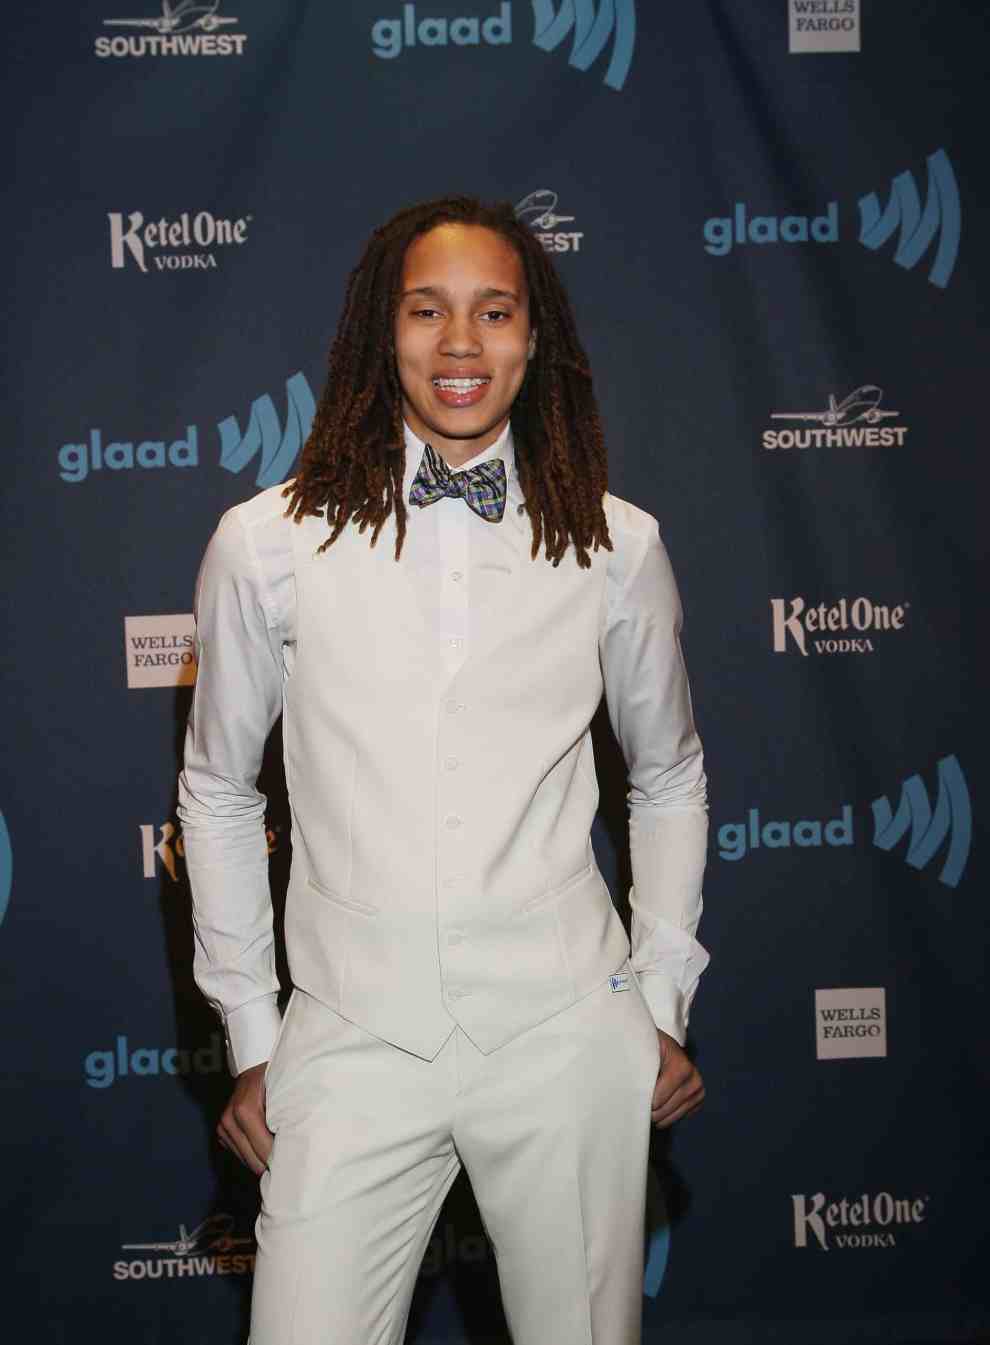 SAN FRANCISCO, CA - MAY 11: Basketball player Brittney Griner attends the 24th Annual GLAAD Media Awards at the Hilton San Francisco - Union Square on May 11, 2013 in San Francisco, California.